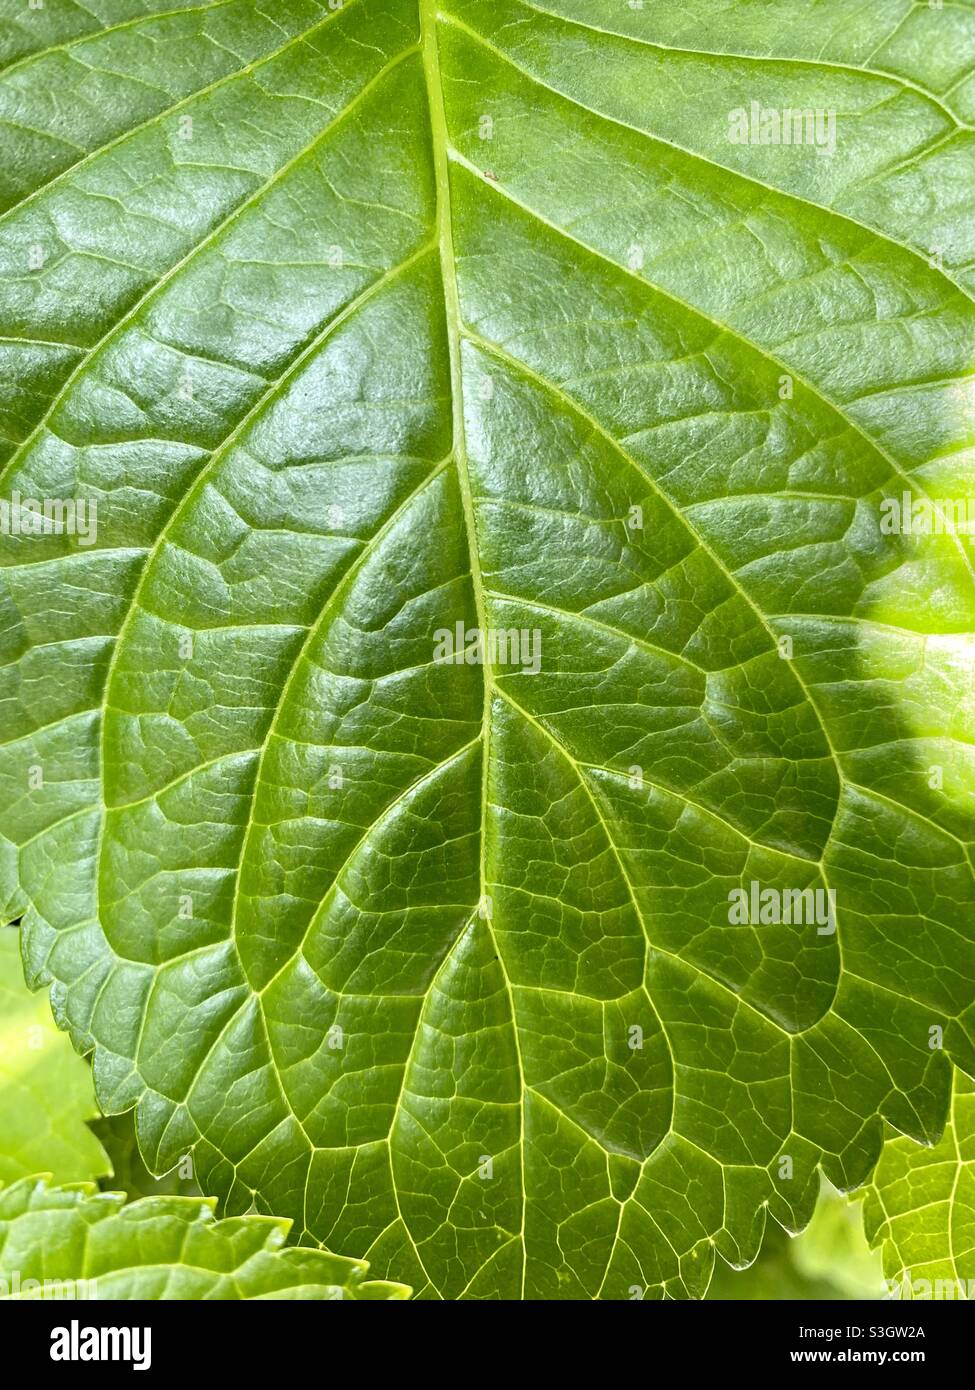 Green leaf texture nature photography Stock Photo